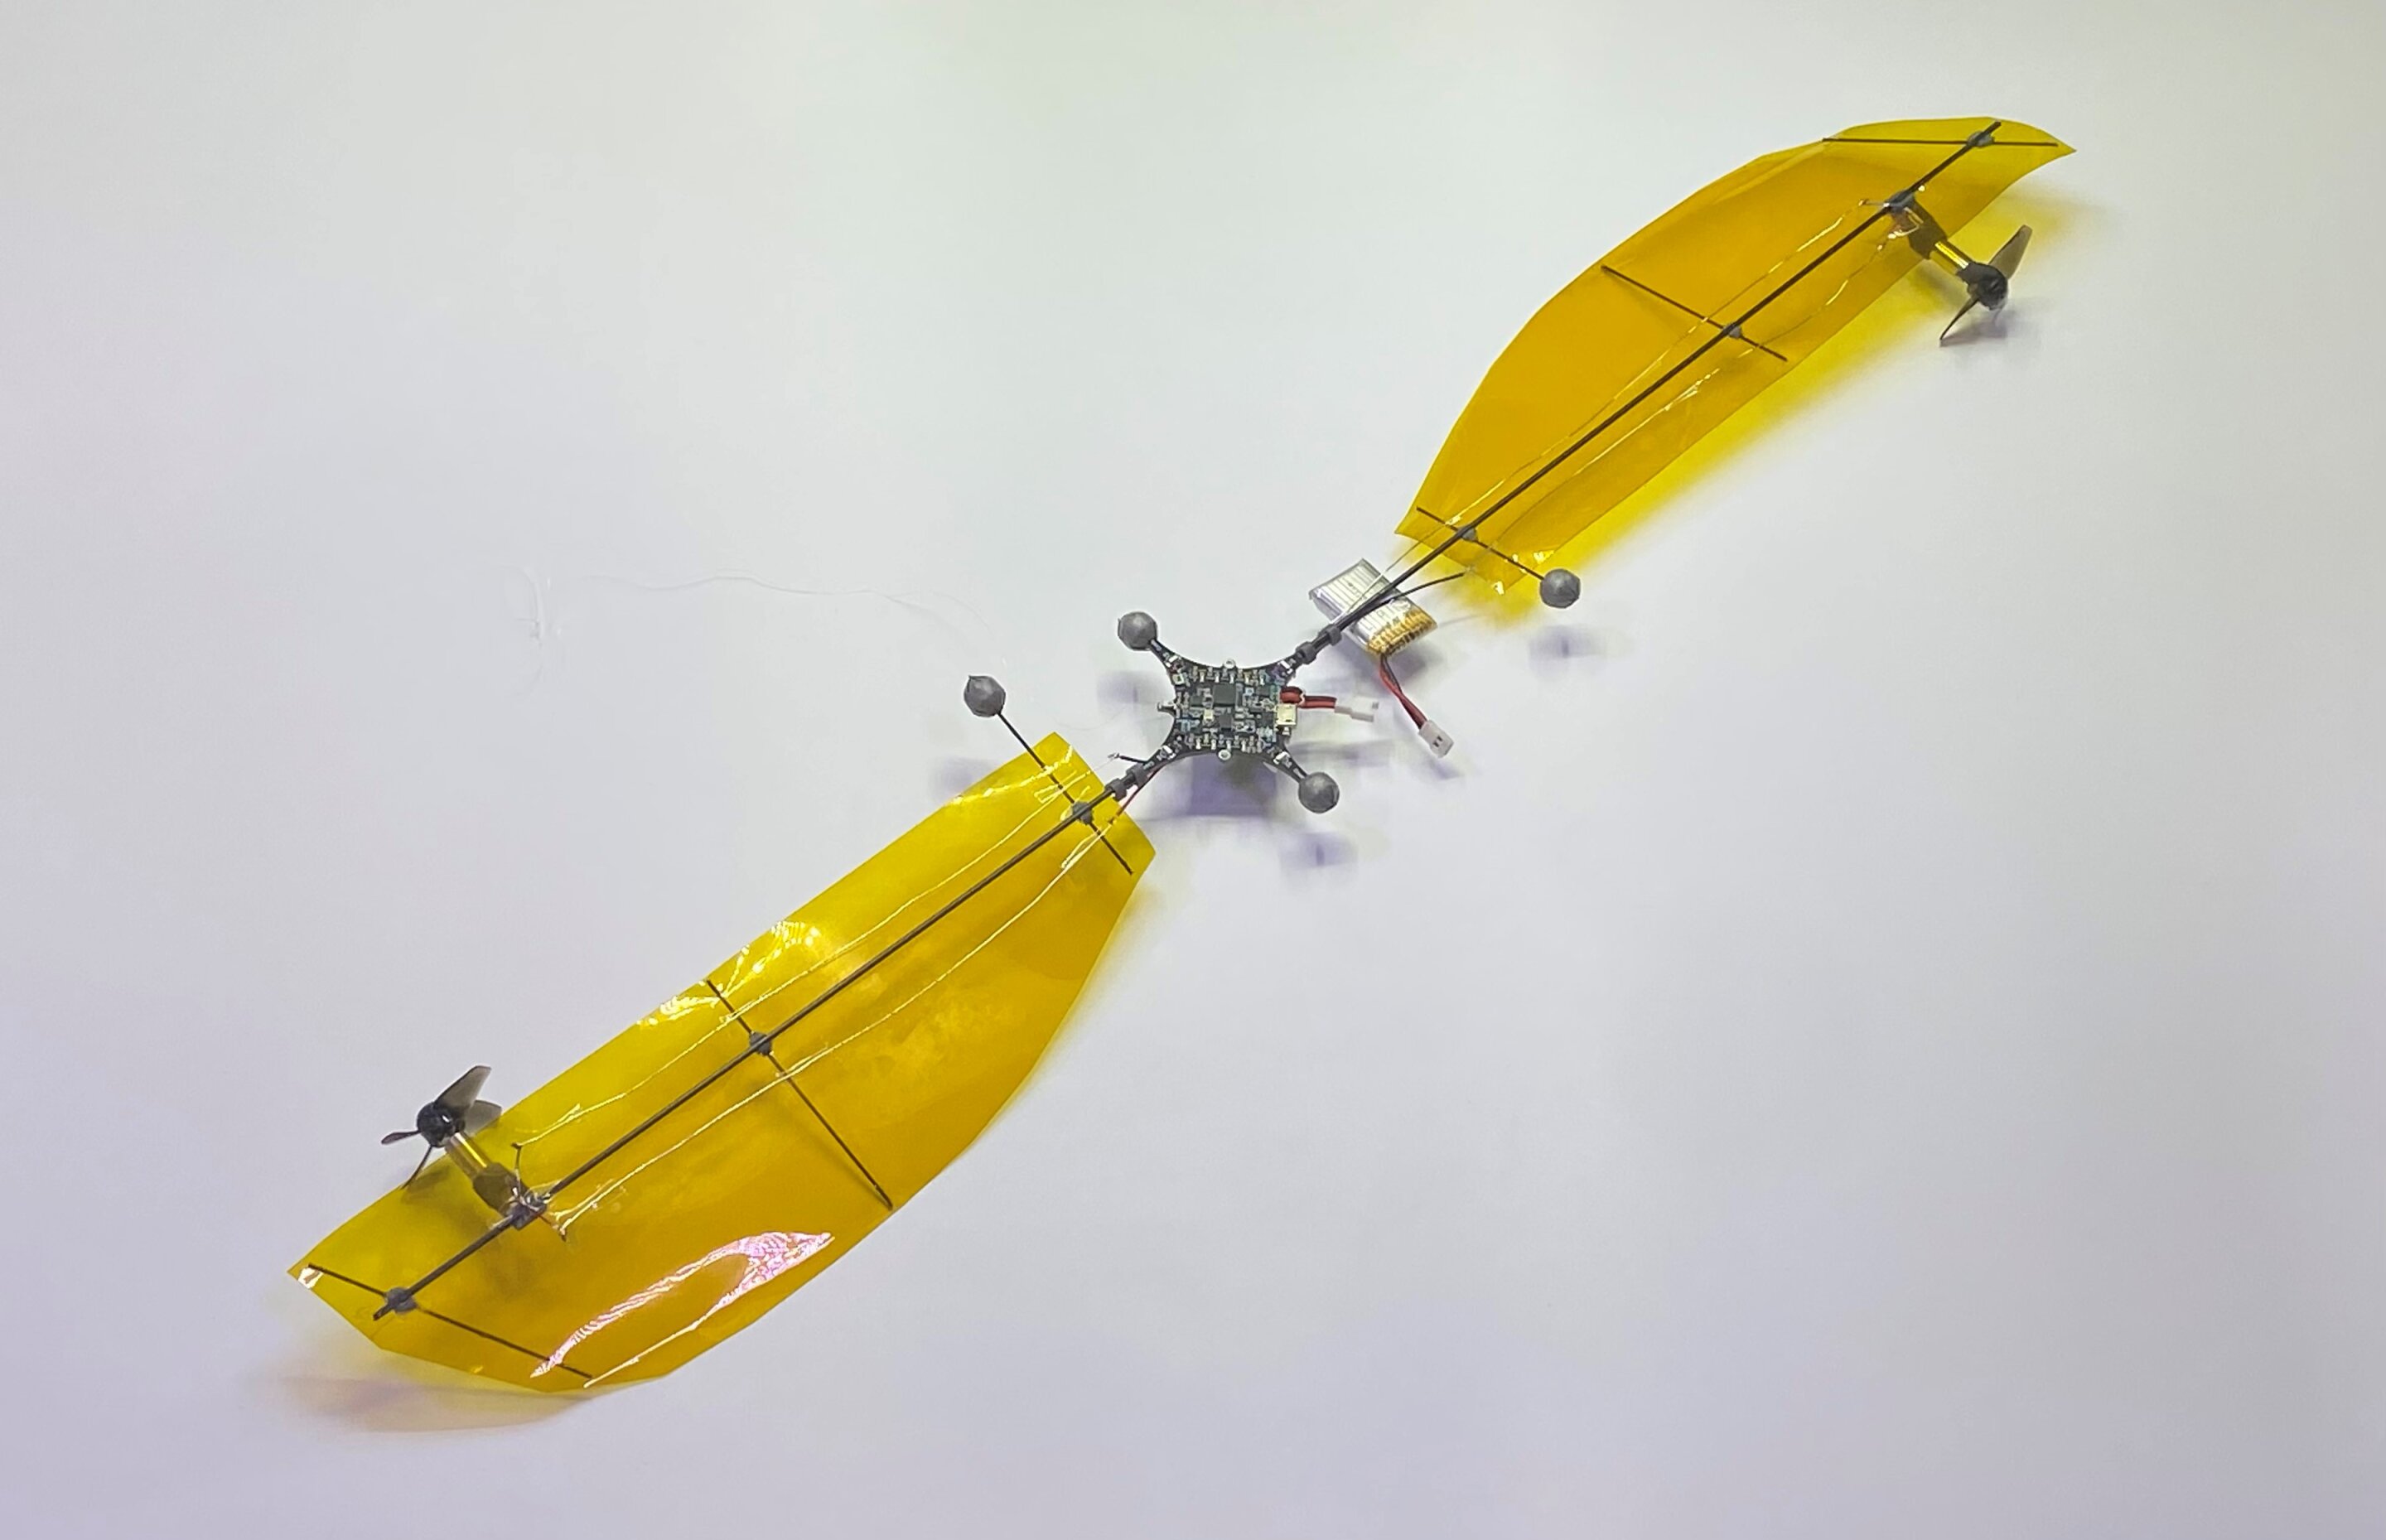 #Tiny drone based on maple seed pod doubles flight time